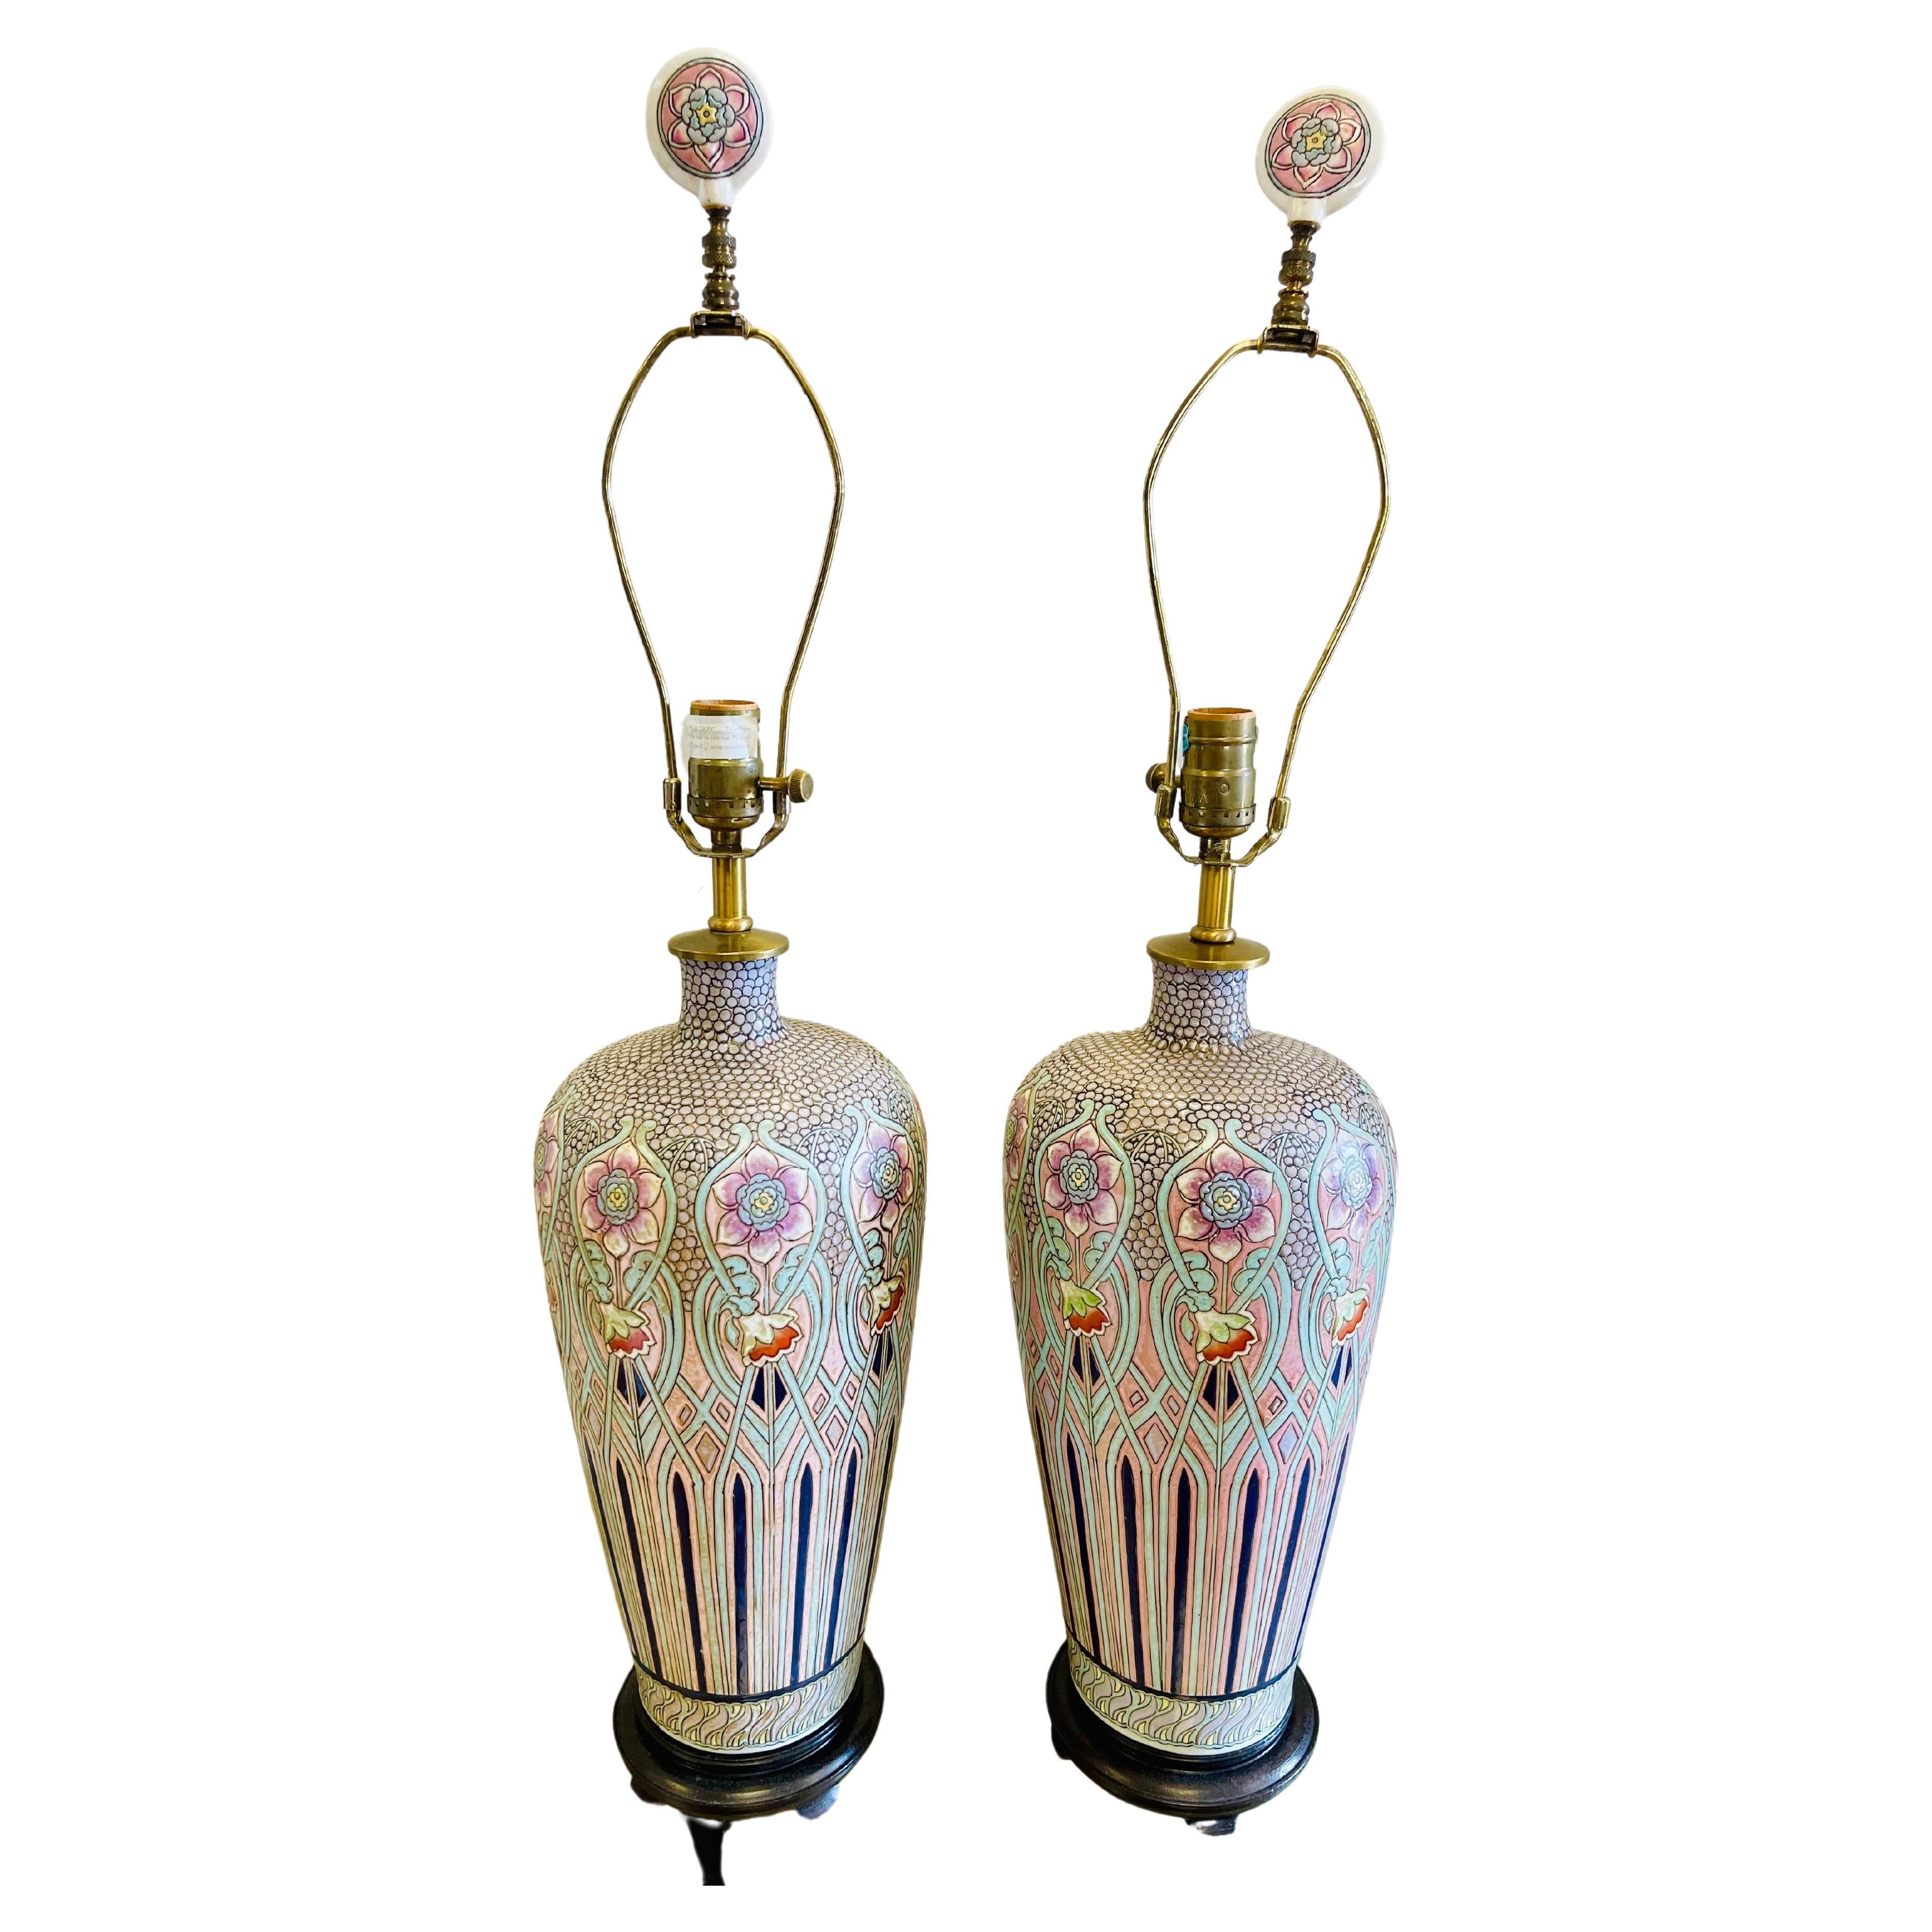 Signed Maitland Smith Substantial Pair of Porcelain Ceramic Table Lamps Matching